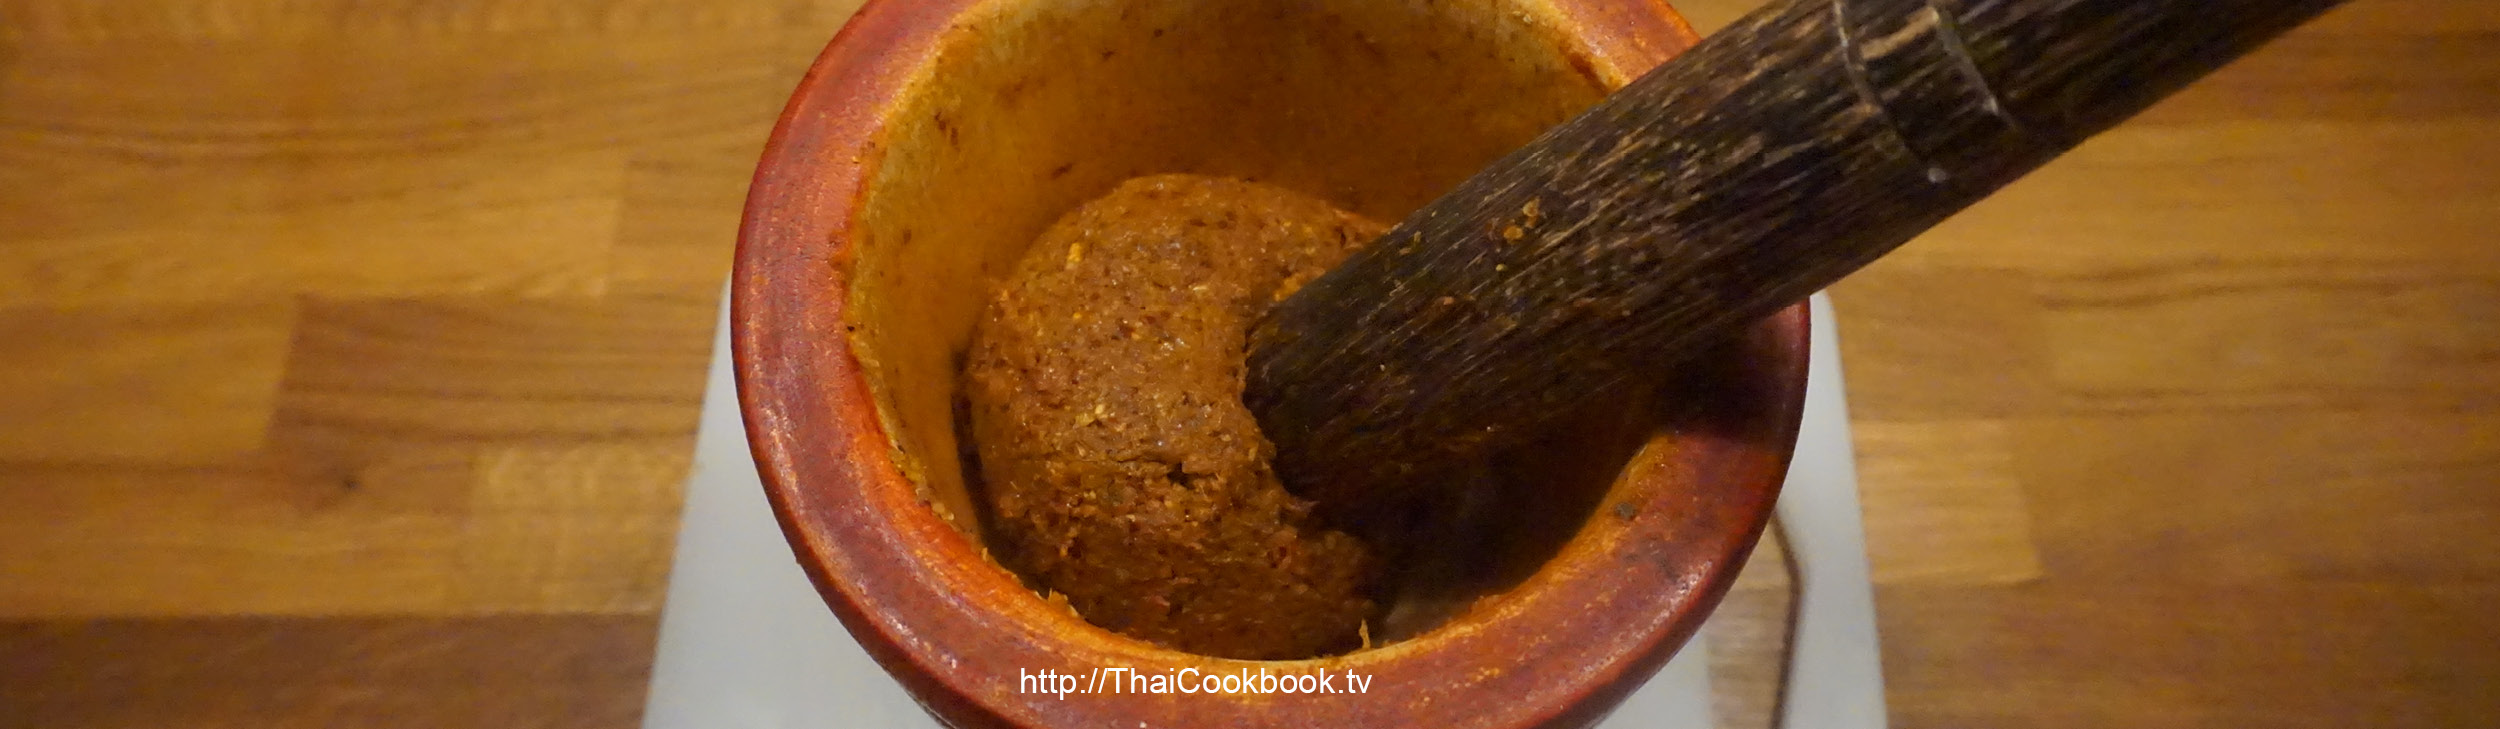 Authentic Thai recipe for Panang Curry Paste